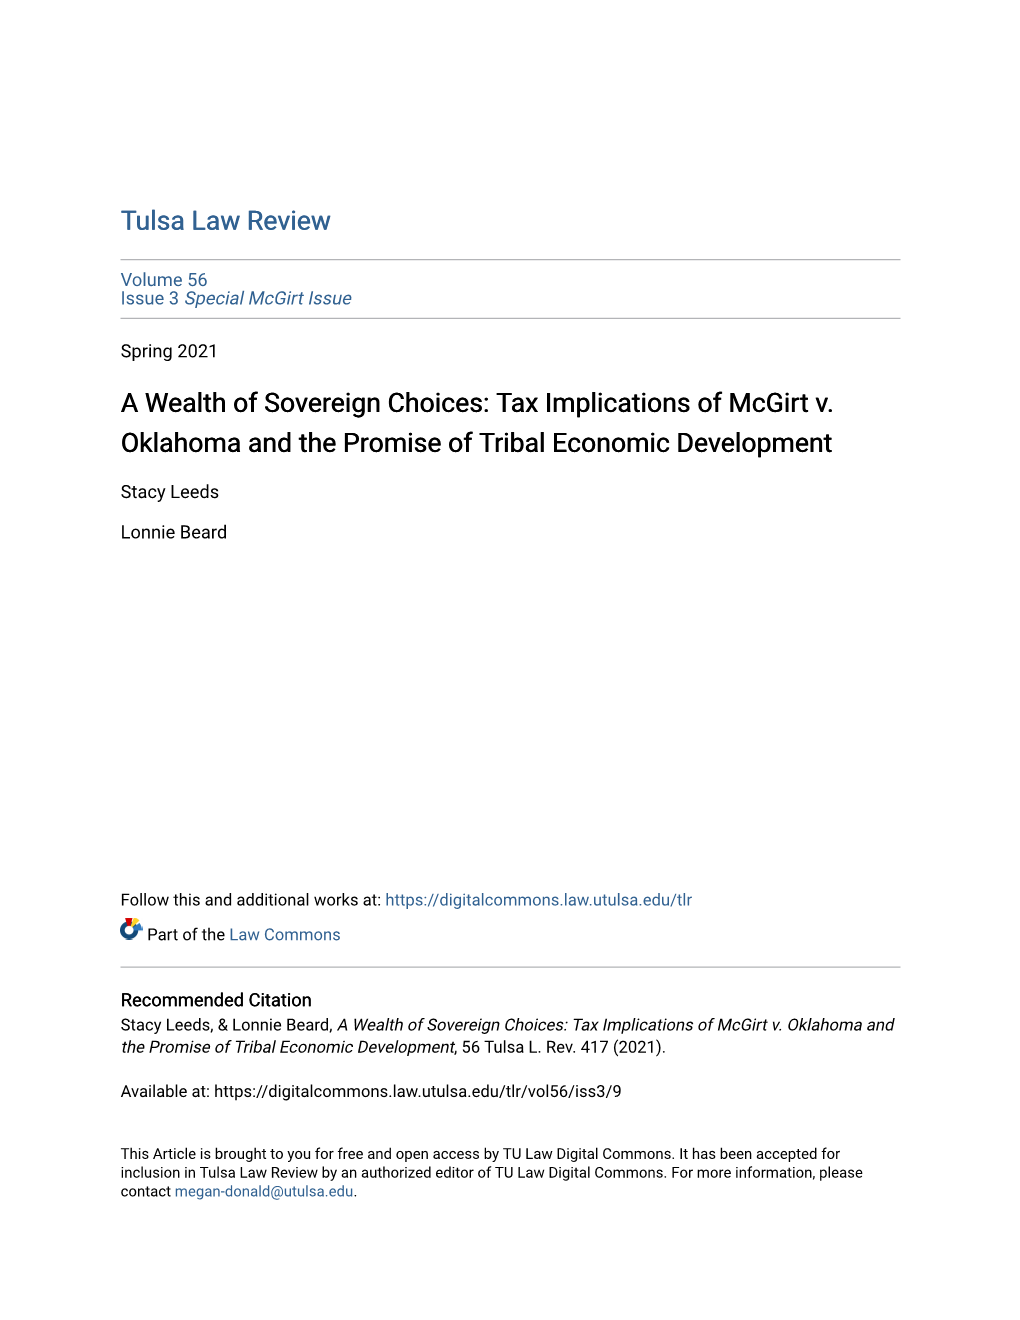 Tax Implications of Mcgirt V. Oklahoma and the Promise of Tribal Economic Development